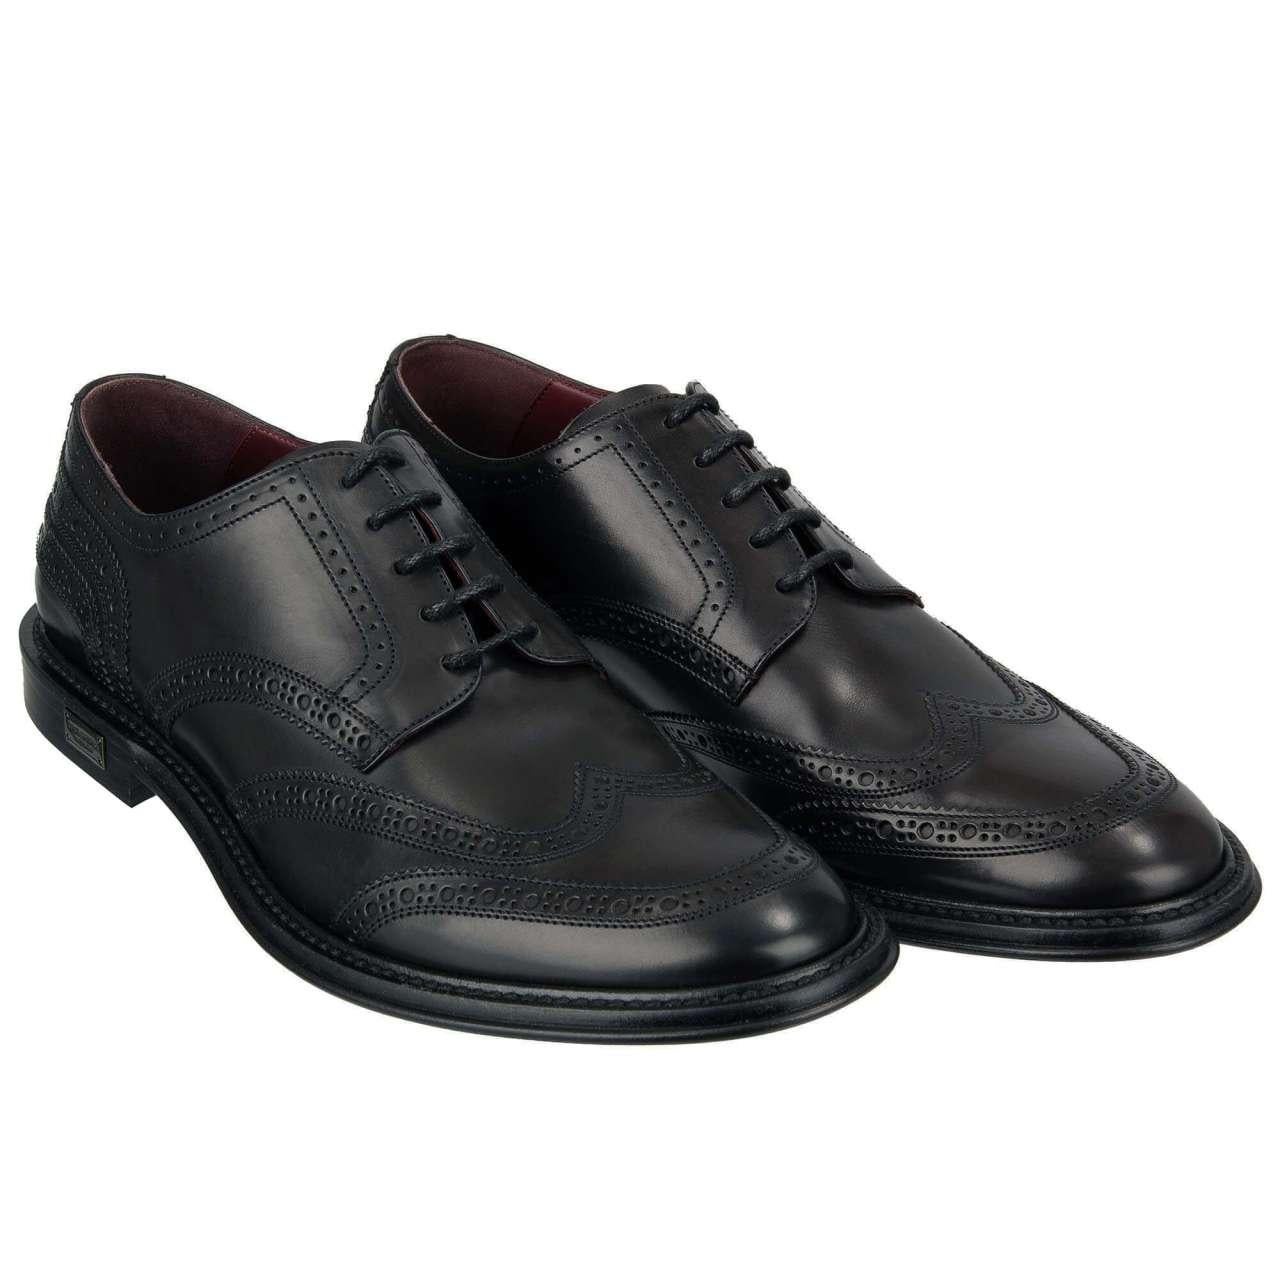 - Exclusive formal derby shoes MARSALA with DG metal logo plate made of Calf LeatherÂ in black by DOLCE & GABBANA - MADE IN ITALY - Former RRP: EUR 749 - New with Box - Model: A10421-AZ895-80999 - Material: 100% Calf Leather - Sole: Leather - Color: